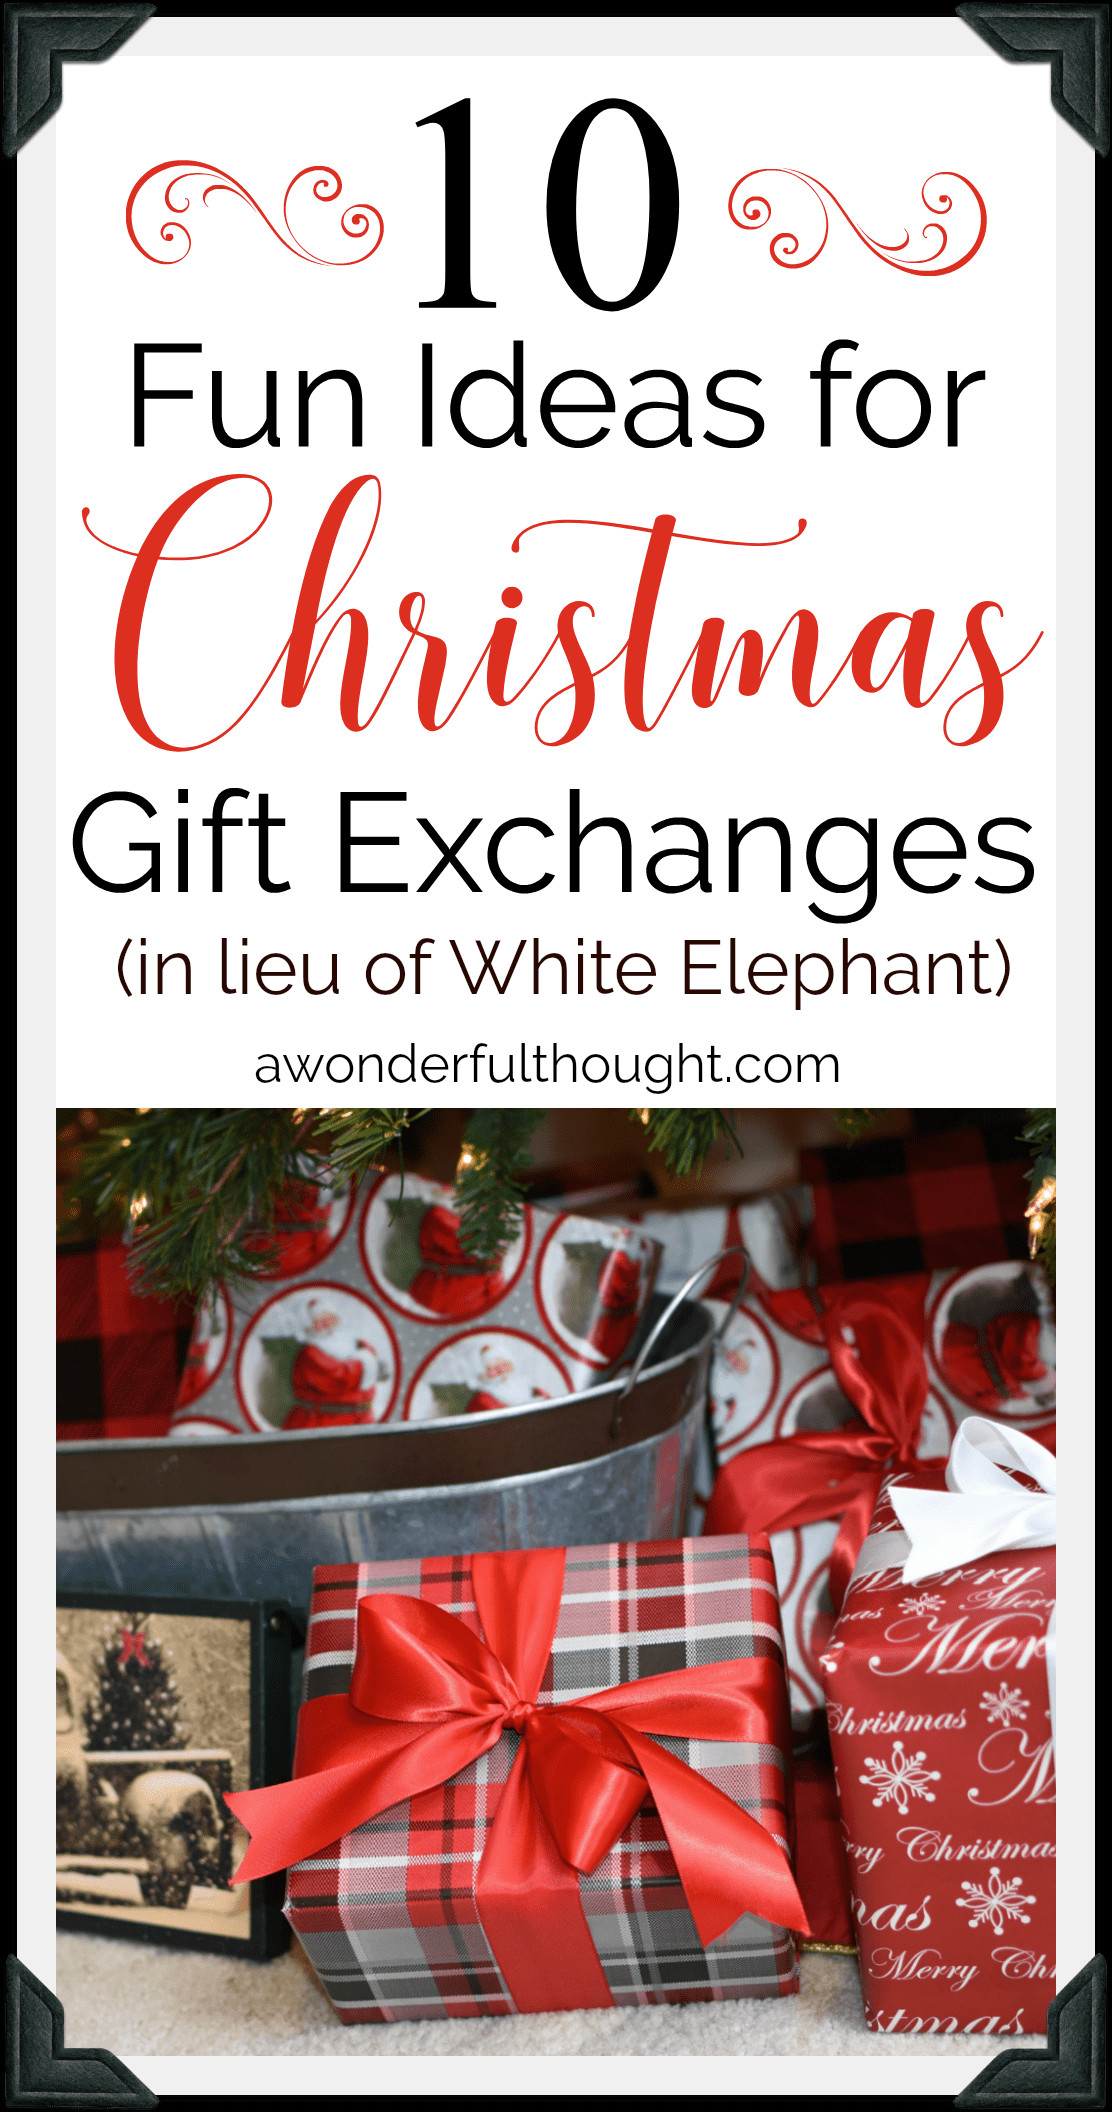 Christmas Party Exchange Ideas
 Christmas Gift Exchange Ideas A Wonderful Thought